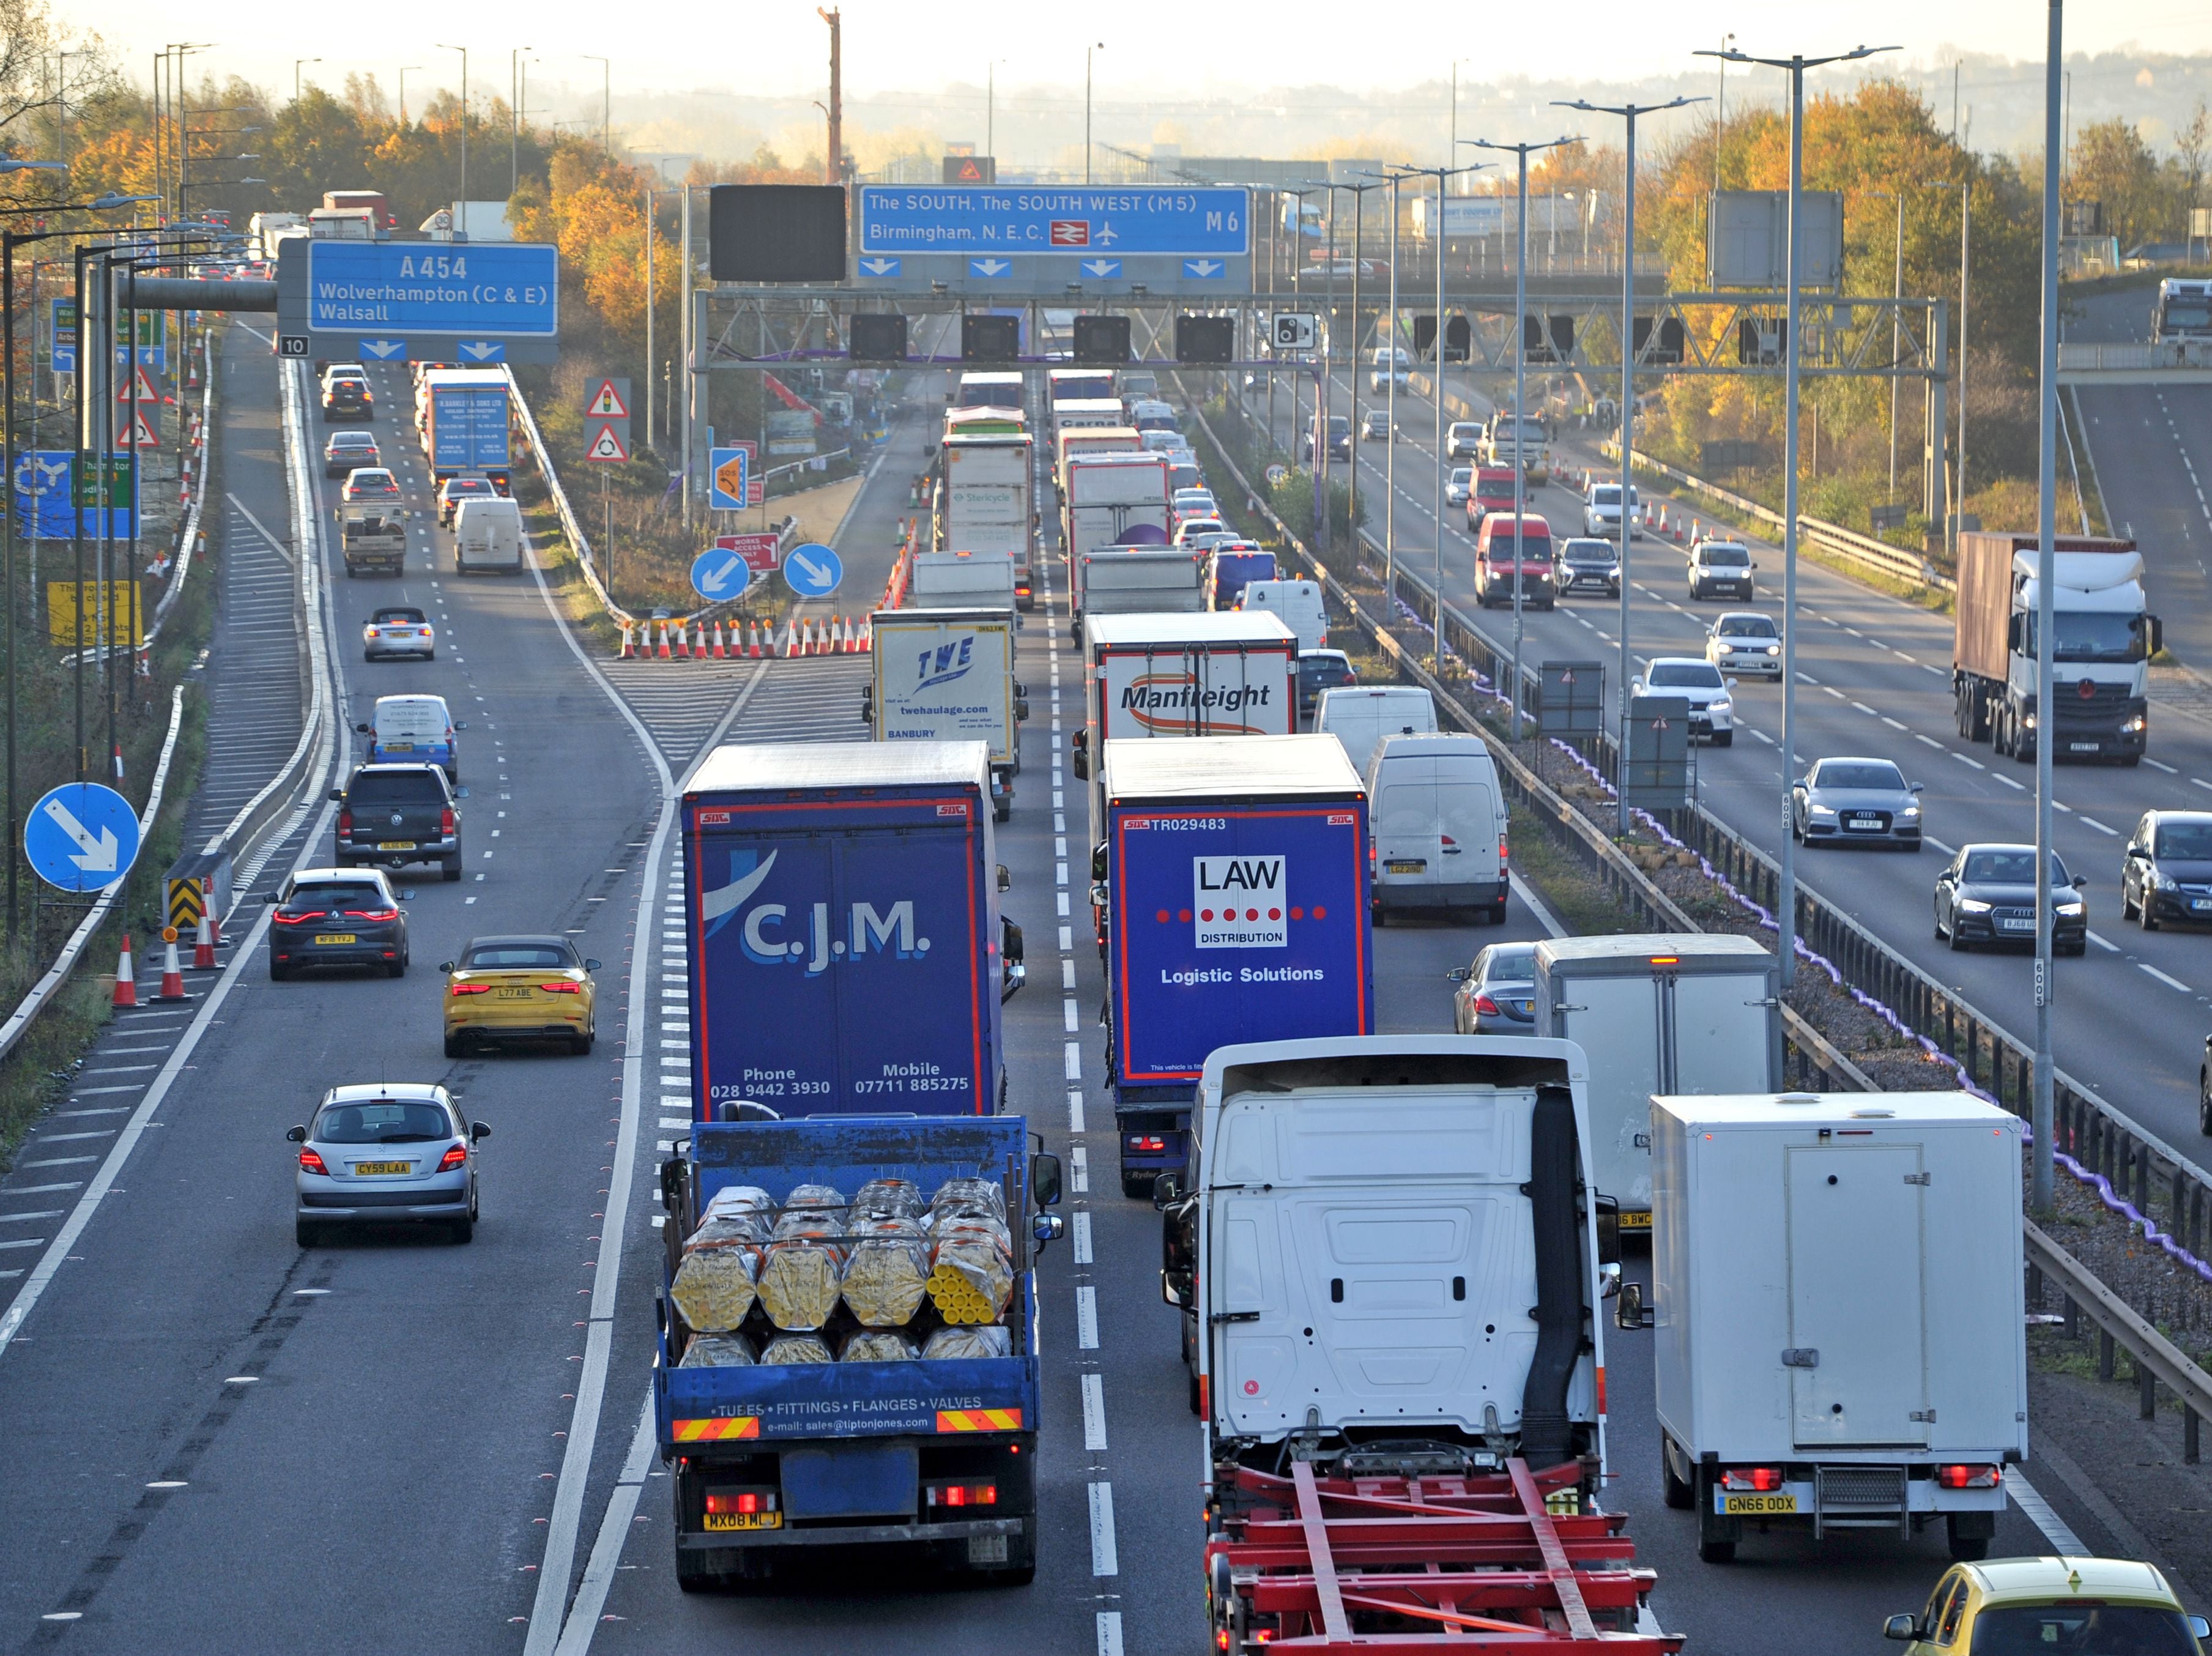 Drivers on M6 told to expect delays due to collision involving two lorries